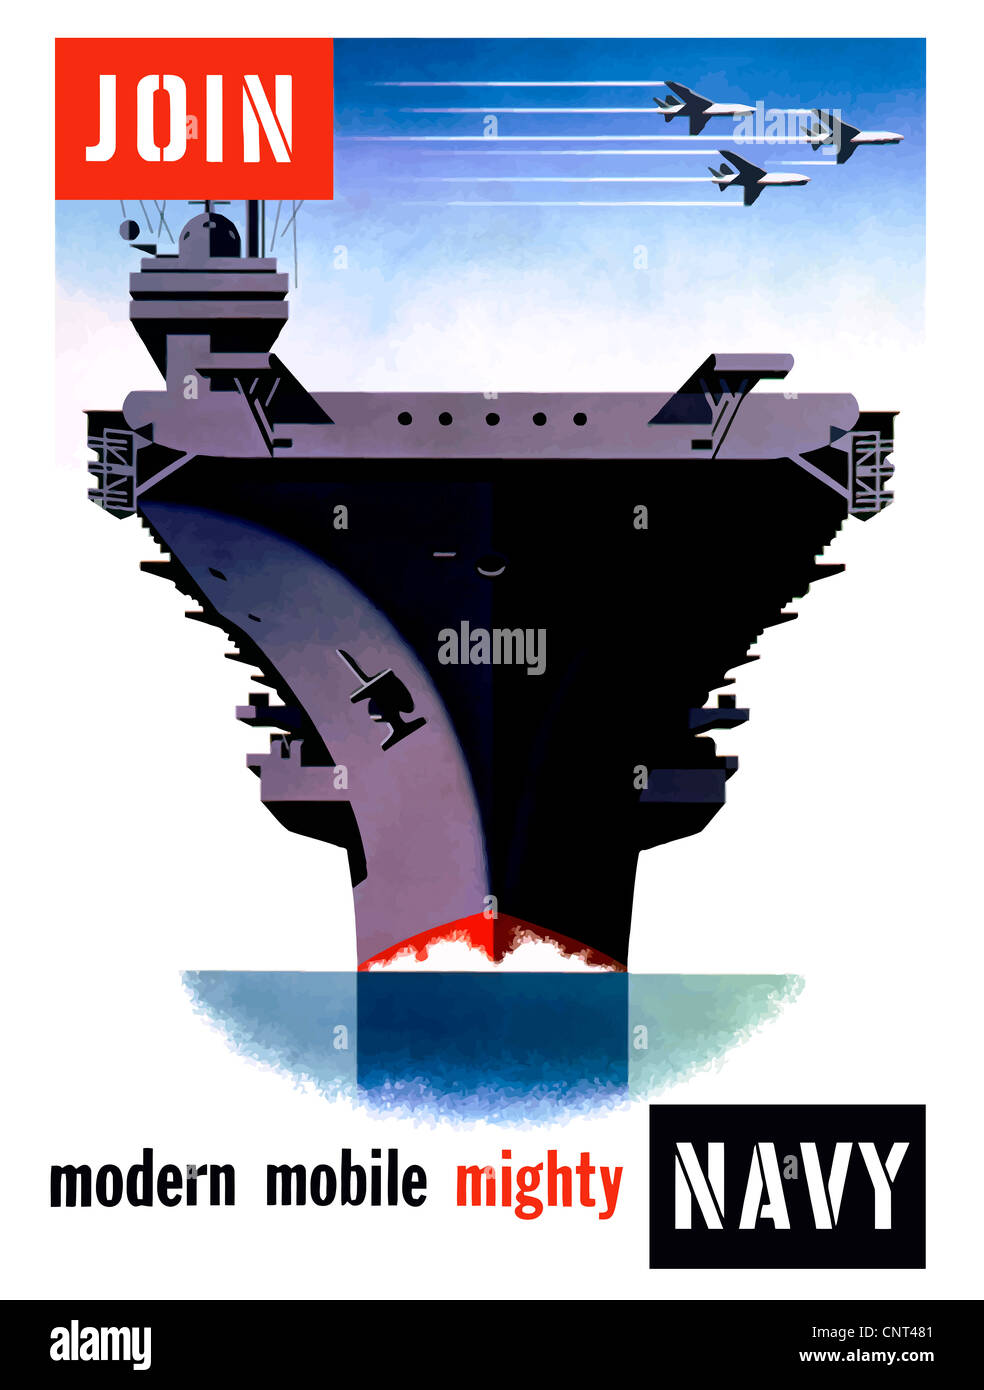 Vintage World War II poster of an aircraft carrier with three planes flying overhead. Stock Photo